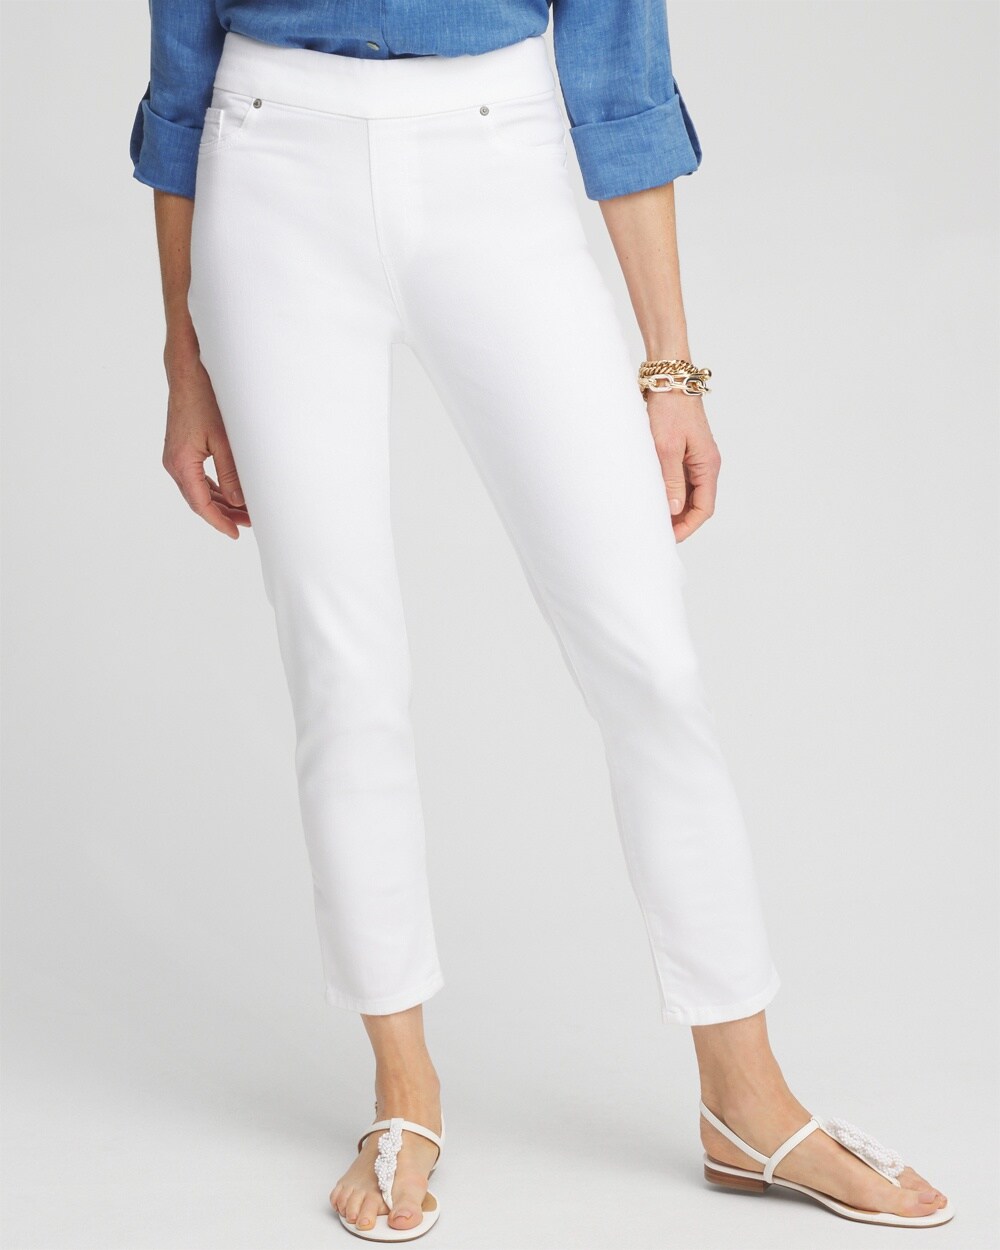 Petite No-Stain White Denim Ankle Jeggings